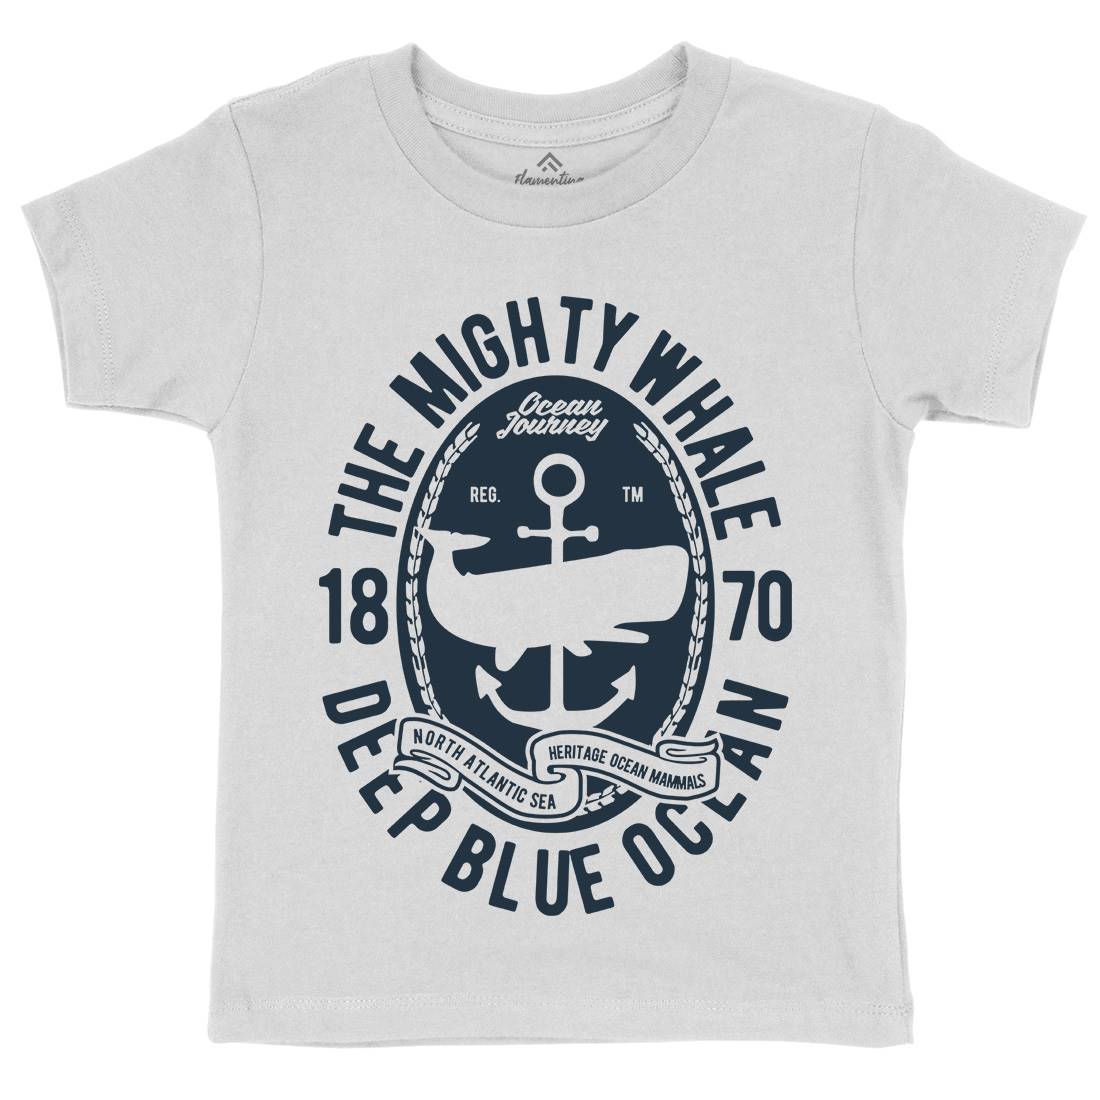 The Mighty Whale Kids Crew Neck T-Shirt Navy B466